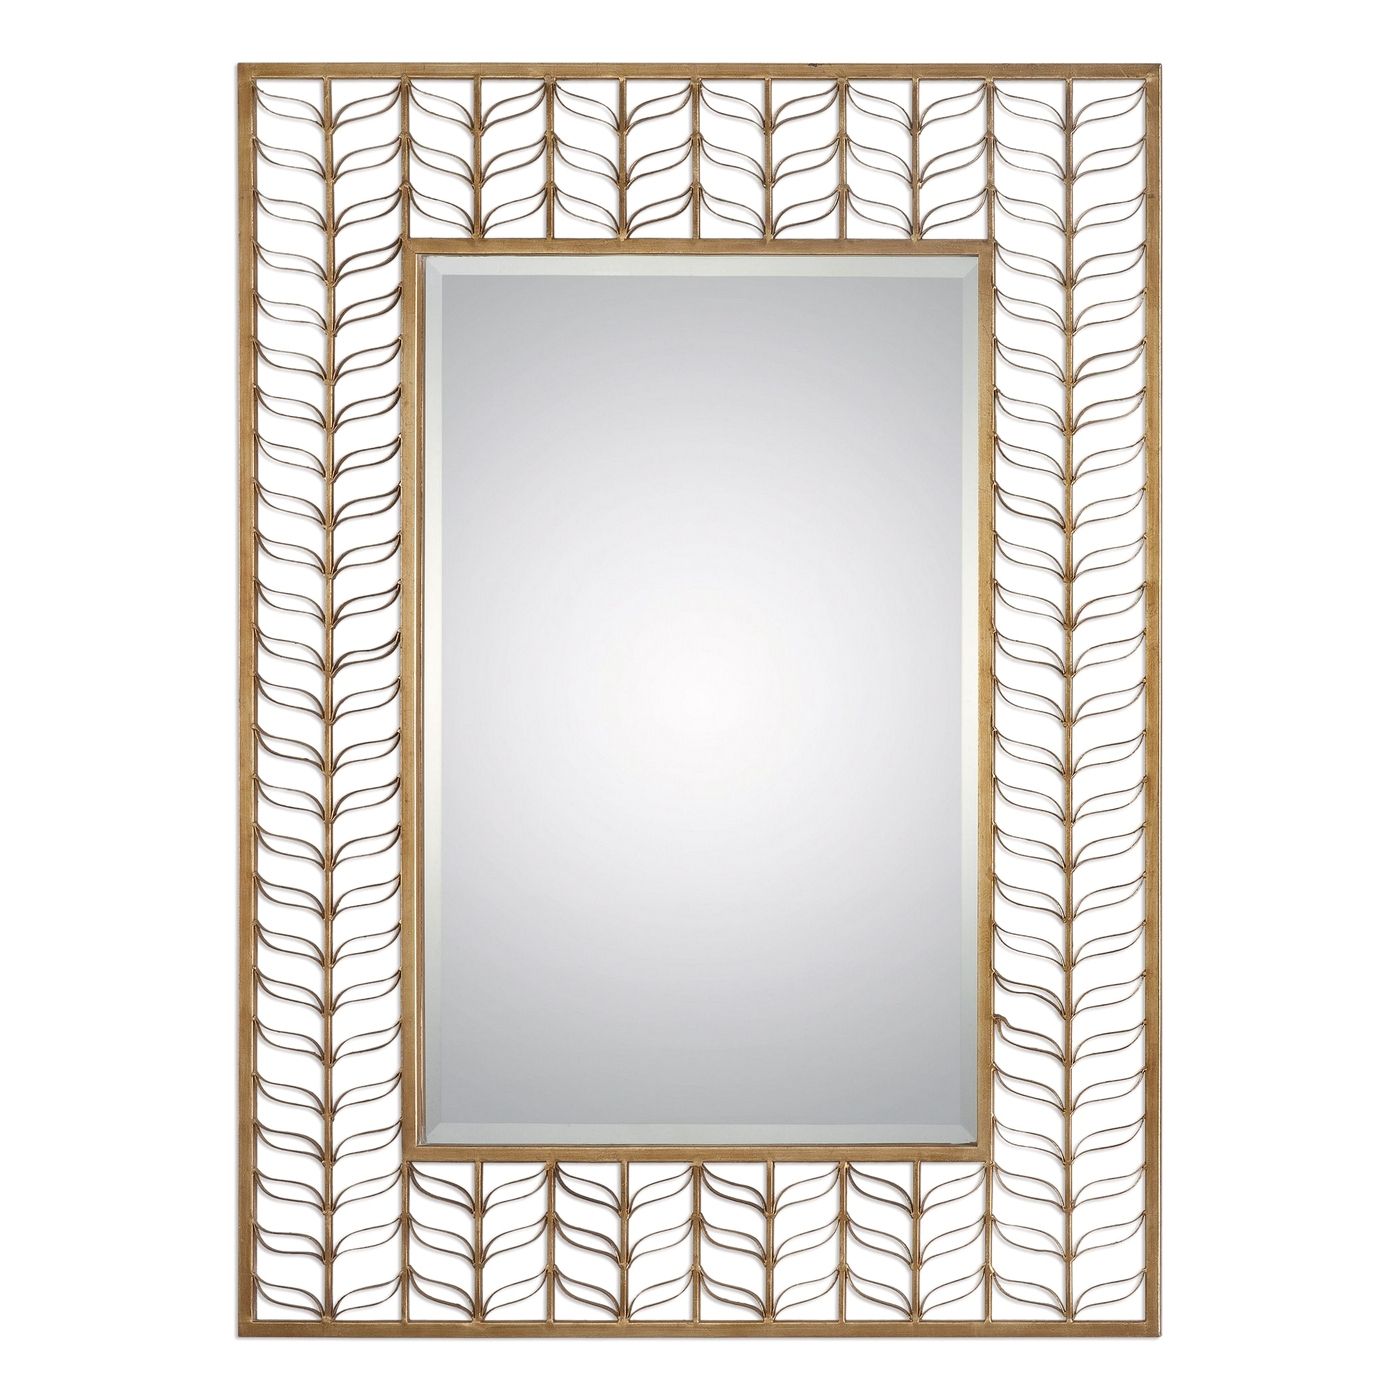 Phyllida Artistic Rectangular Mirror With Gold Leaf Pattern Metal Frame Intended For Butterfly Gold Leaf Wall Mirrors (View 2 of 15)